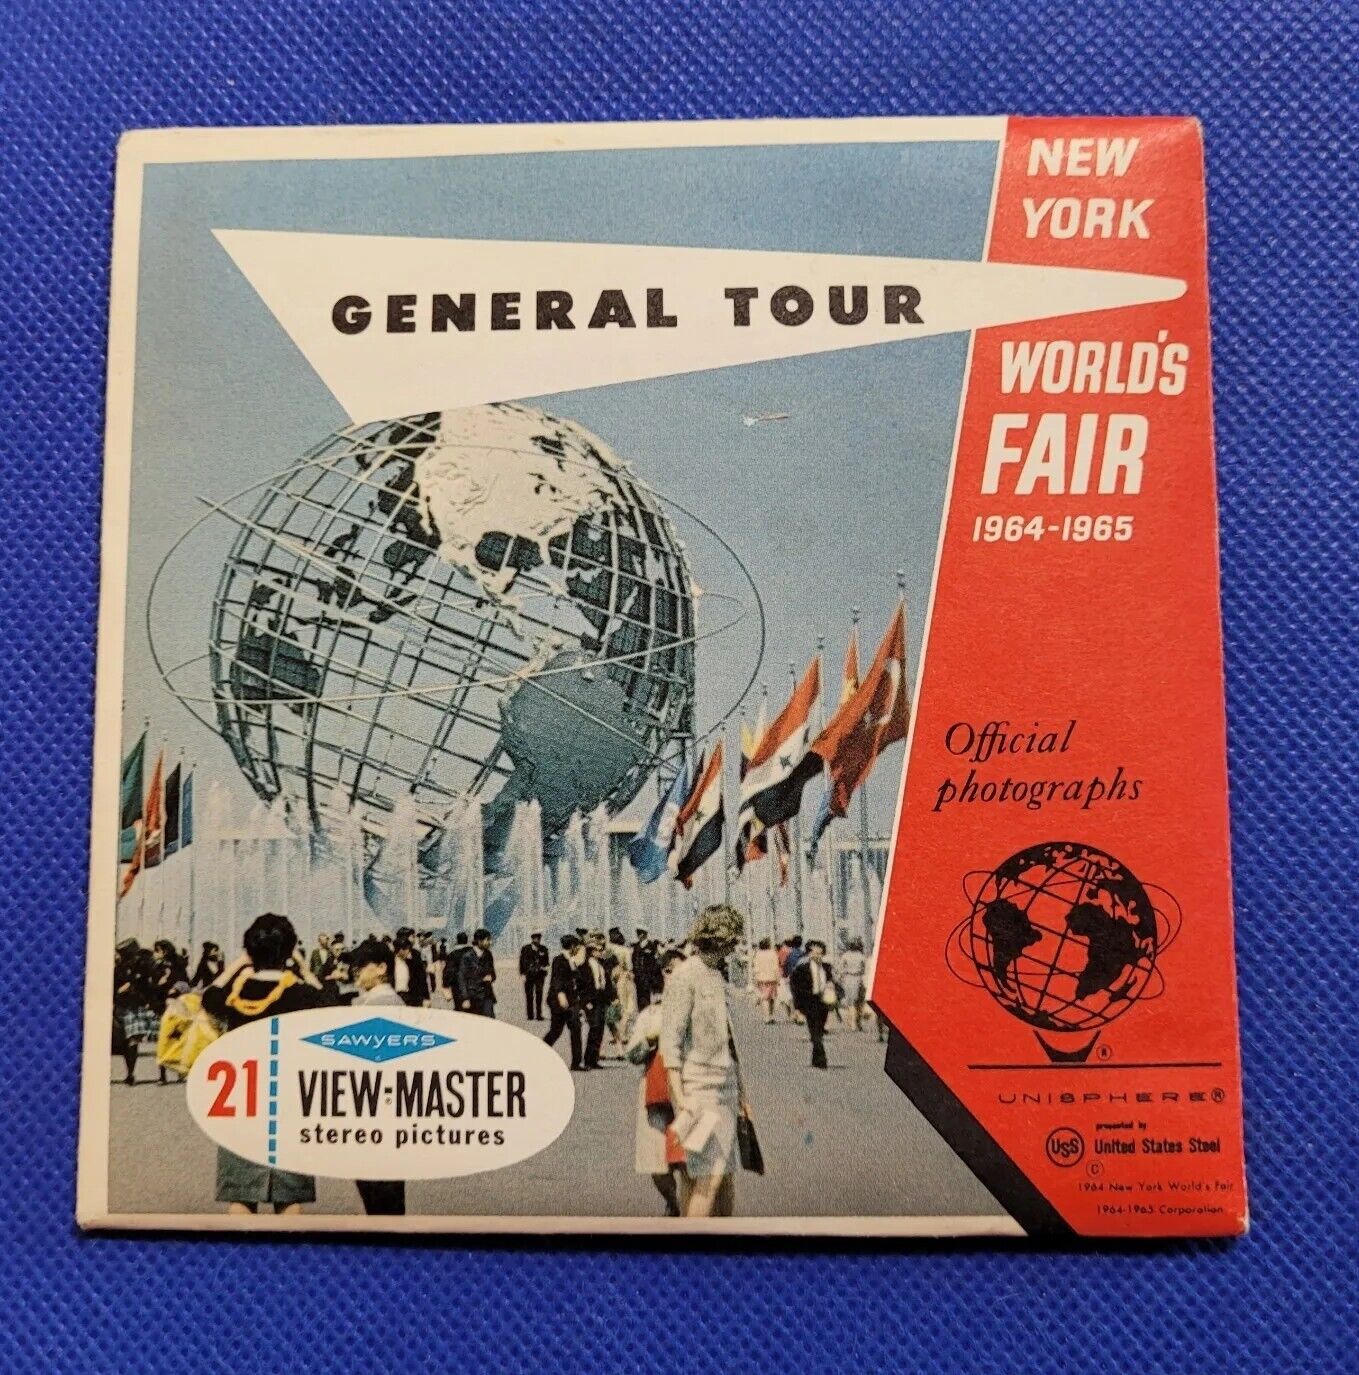 A671 New York World's Fair 64-65 General Tour view-master 3 Reels Packet